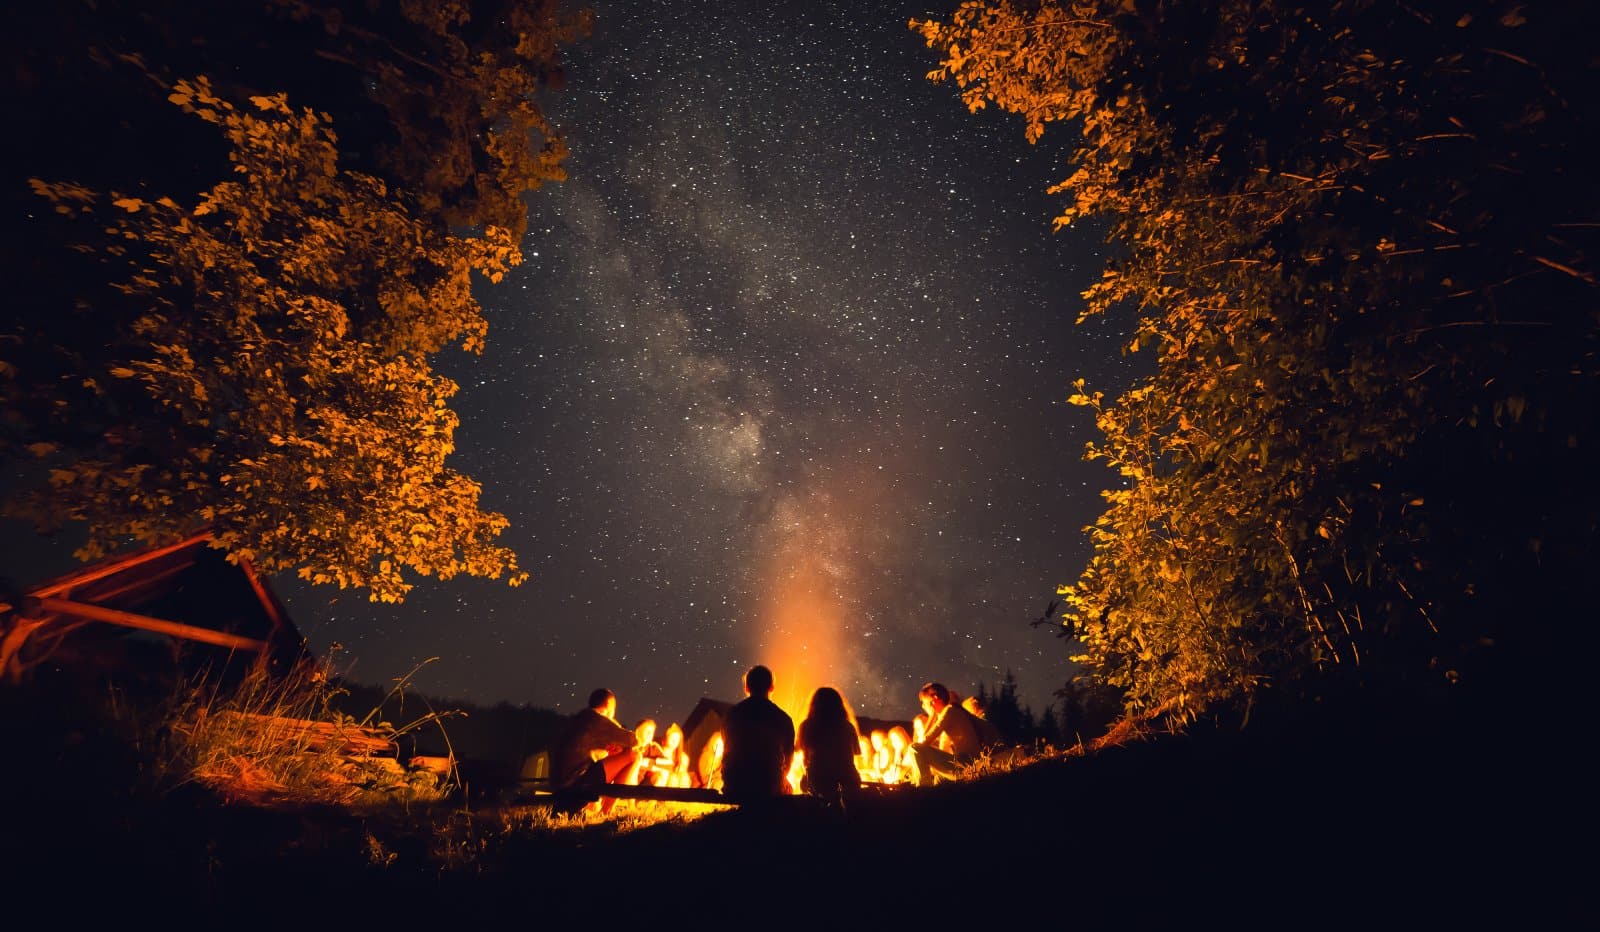 <p class="wp-caption-text">Image Credit: Shutterstock / Volodya Senkiv</p>  <p><span>Luxury campgrounds offer amenities like Wi-Fi and hot showers, while free camping spots appeal to those wanting to save money and connect with nature.</span></p>